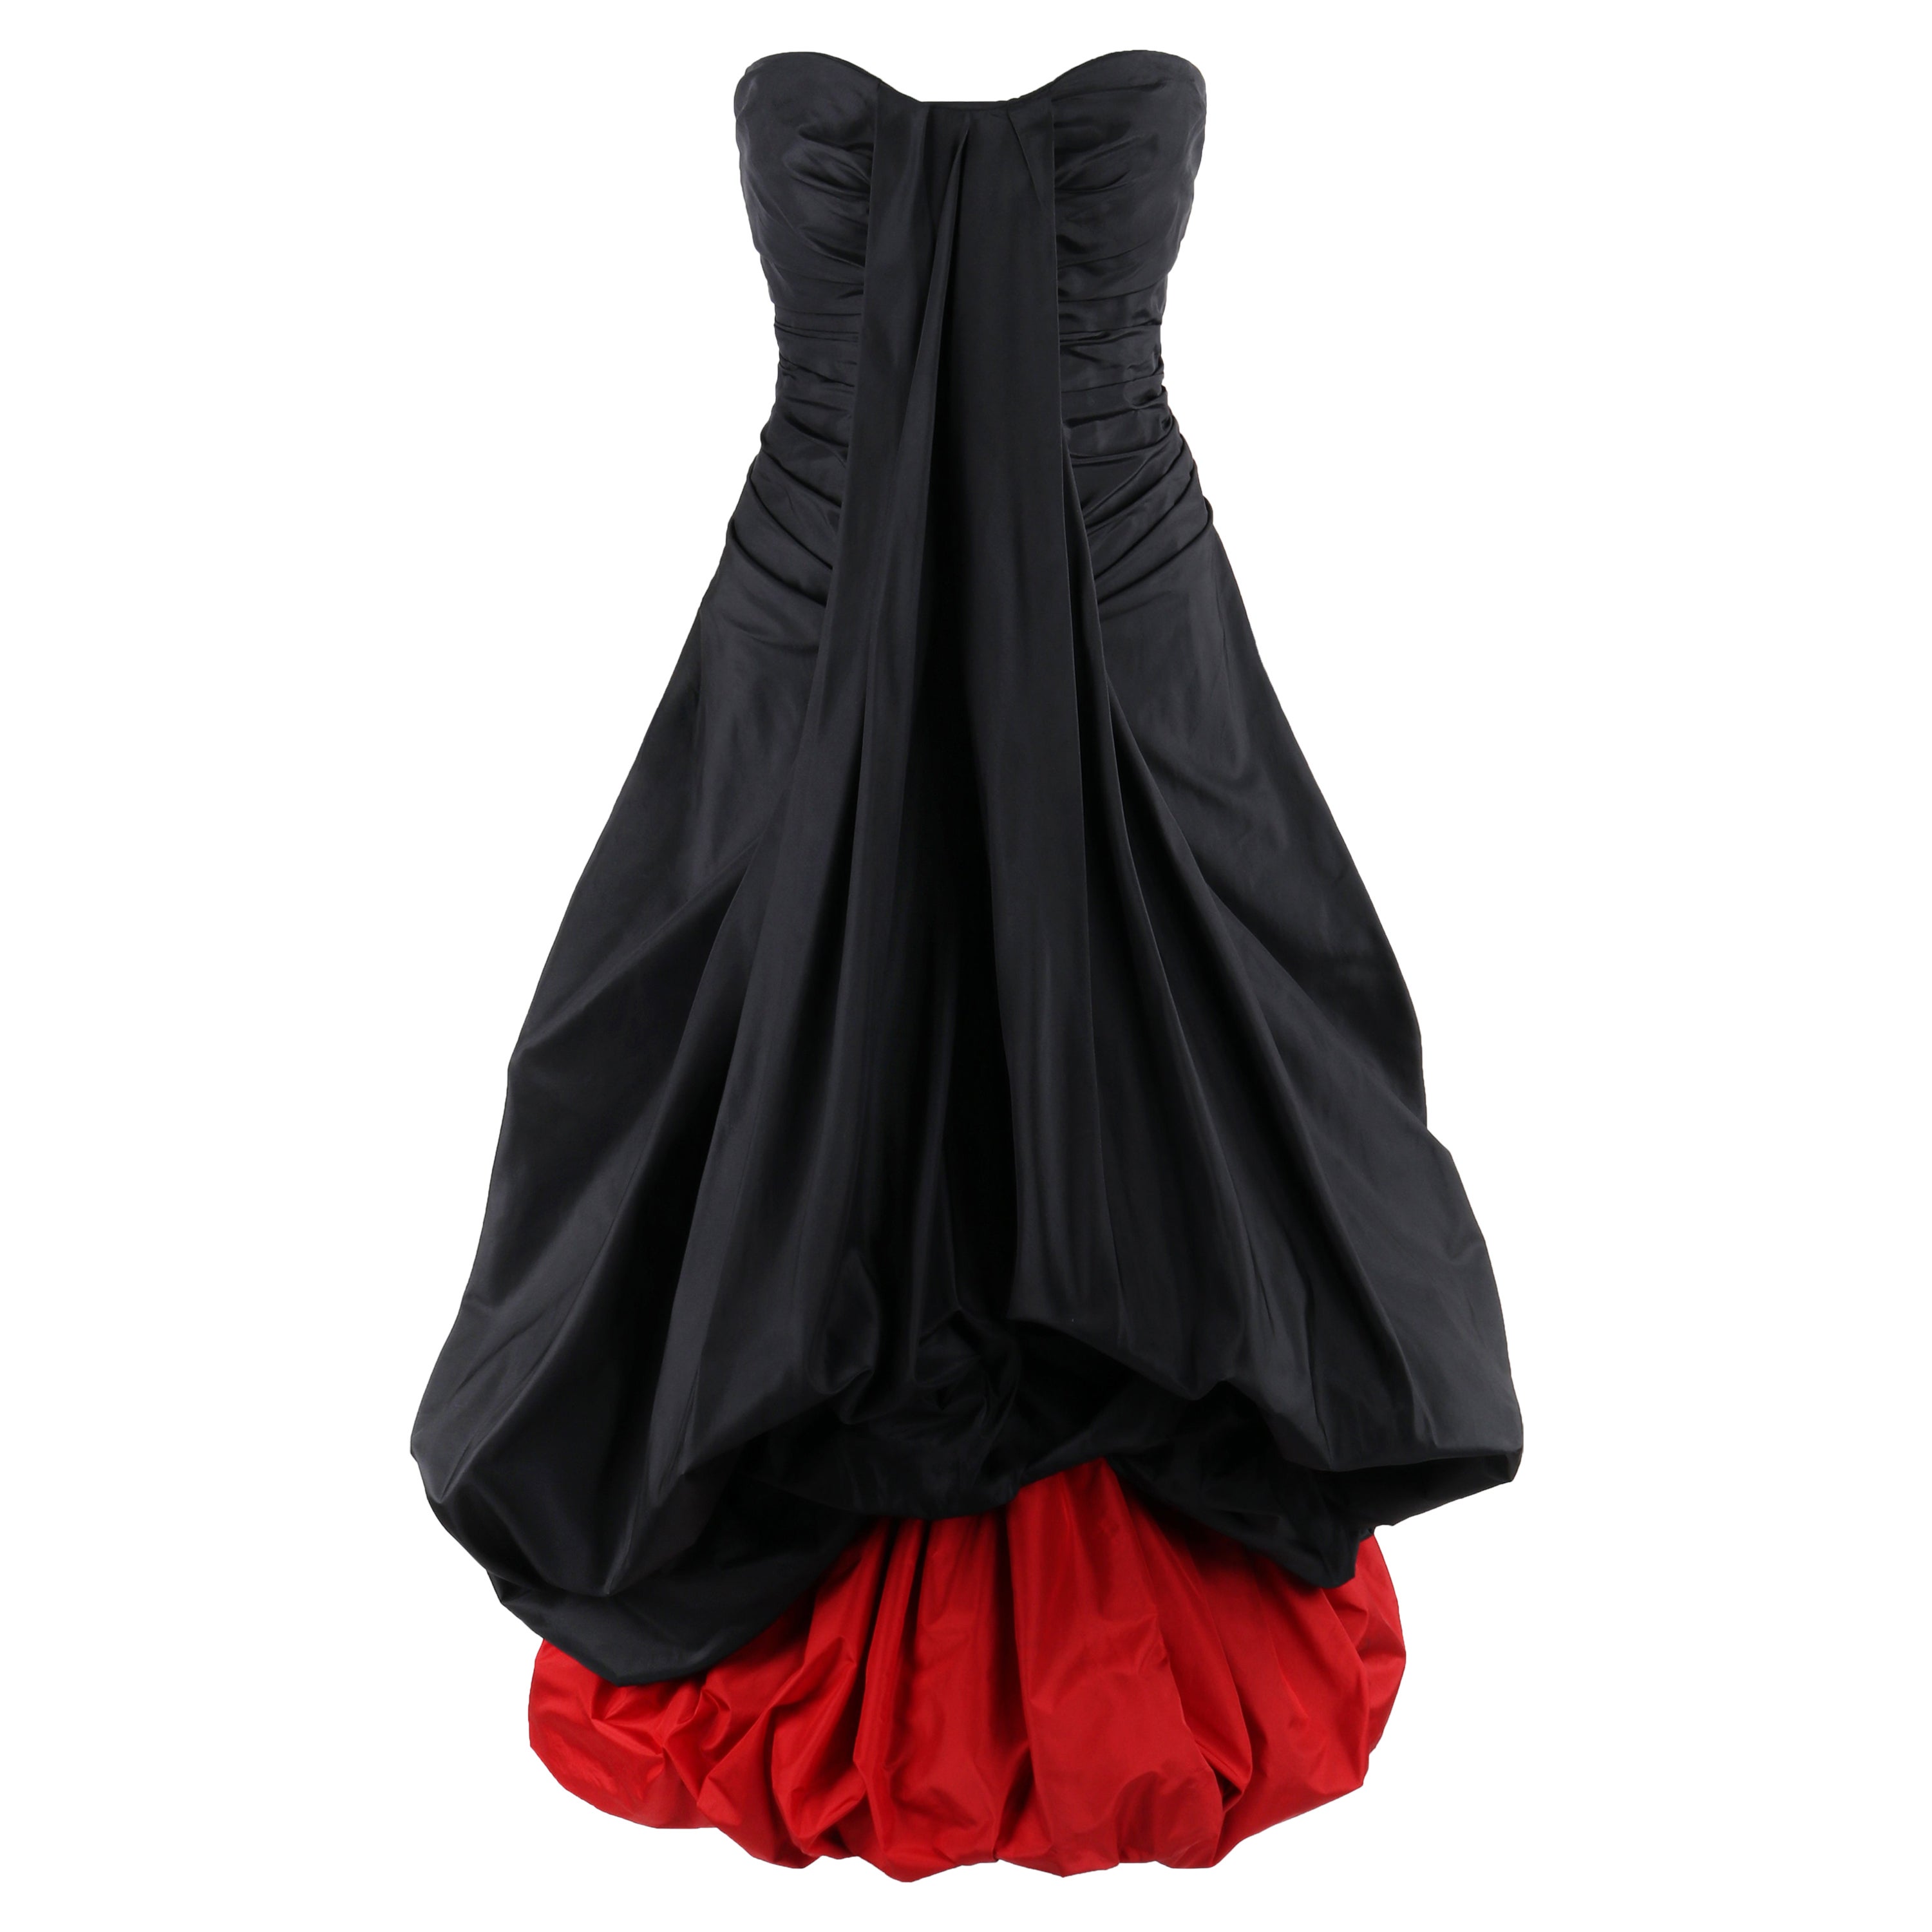 ALEXANDER McQUEEN A/W 2007 "Witches" Black Red Silk Taffeta Bubble Evening Gown For Sale